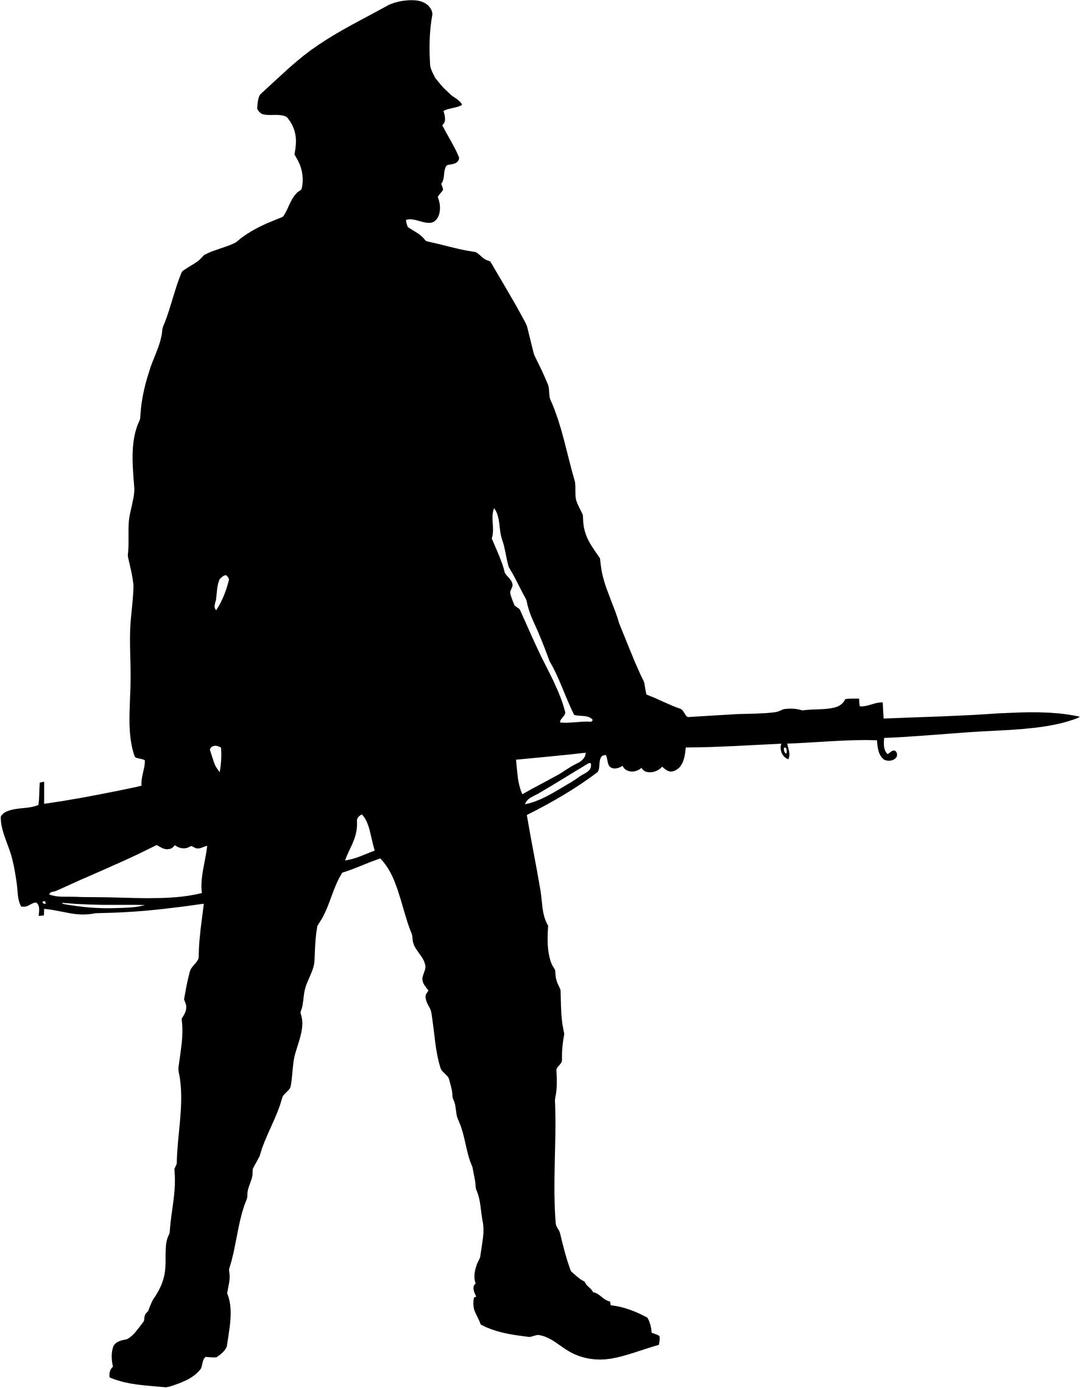 Soldier With Rifle Silhouette png transparent